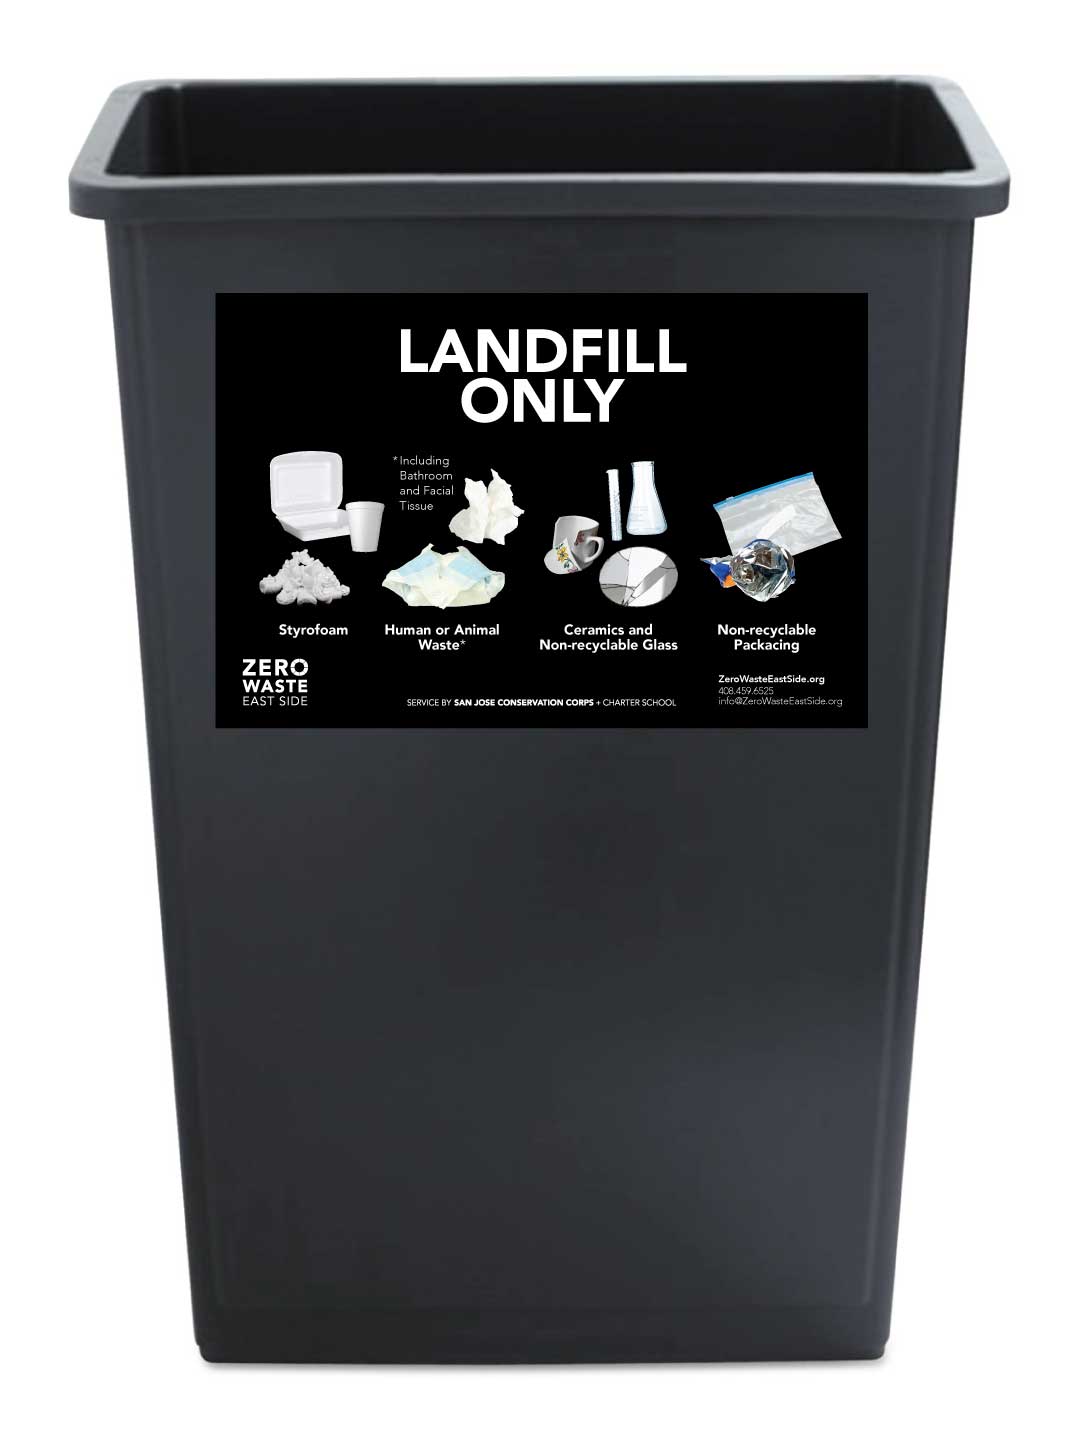 Receptacle Label for Landfill Only